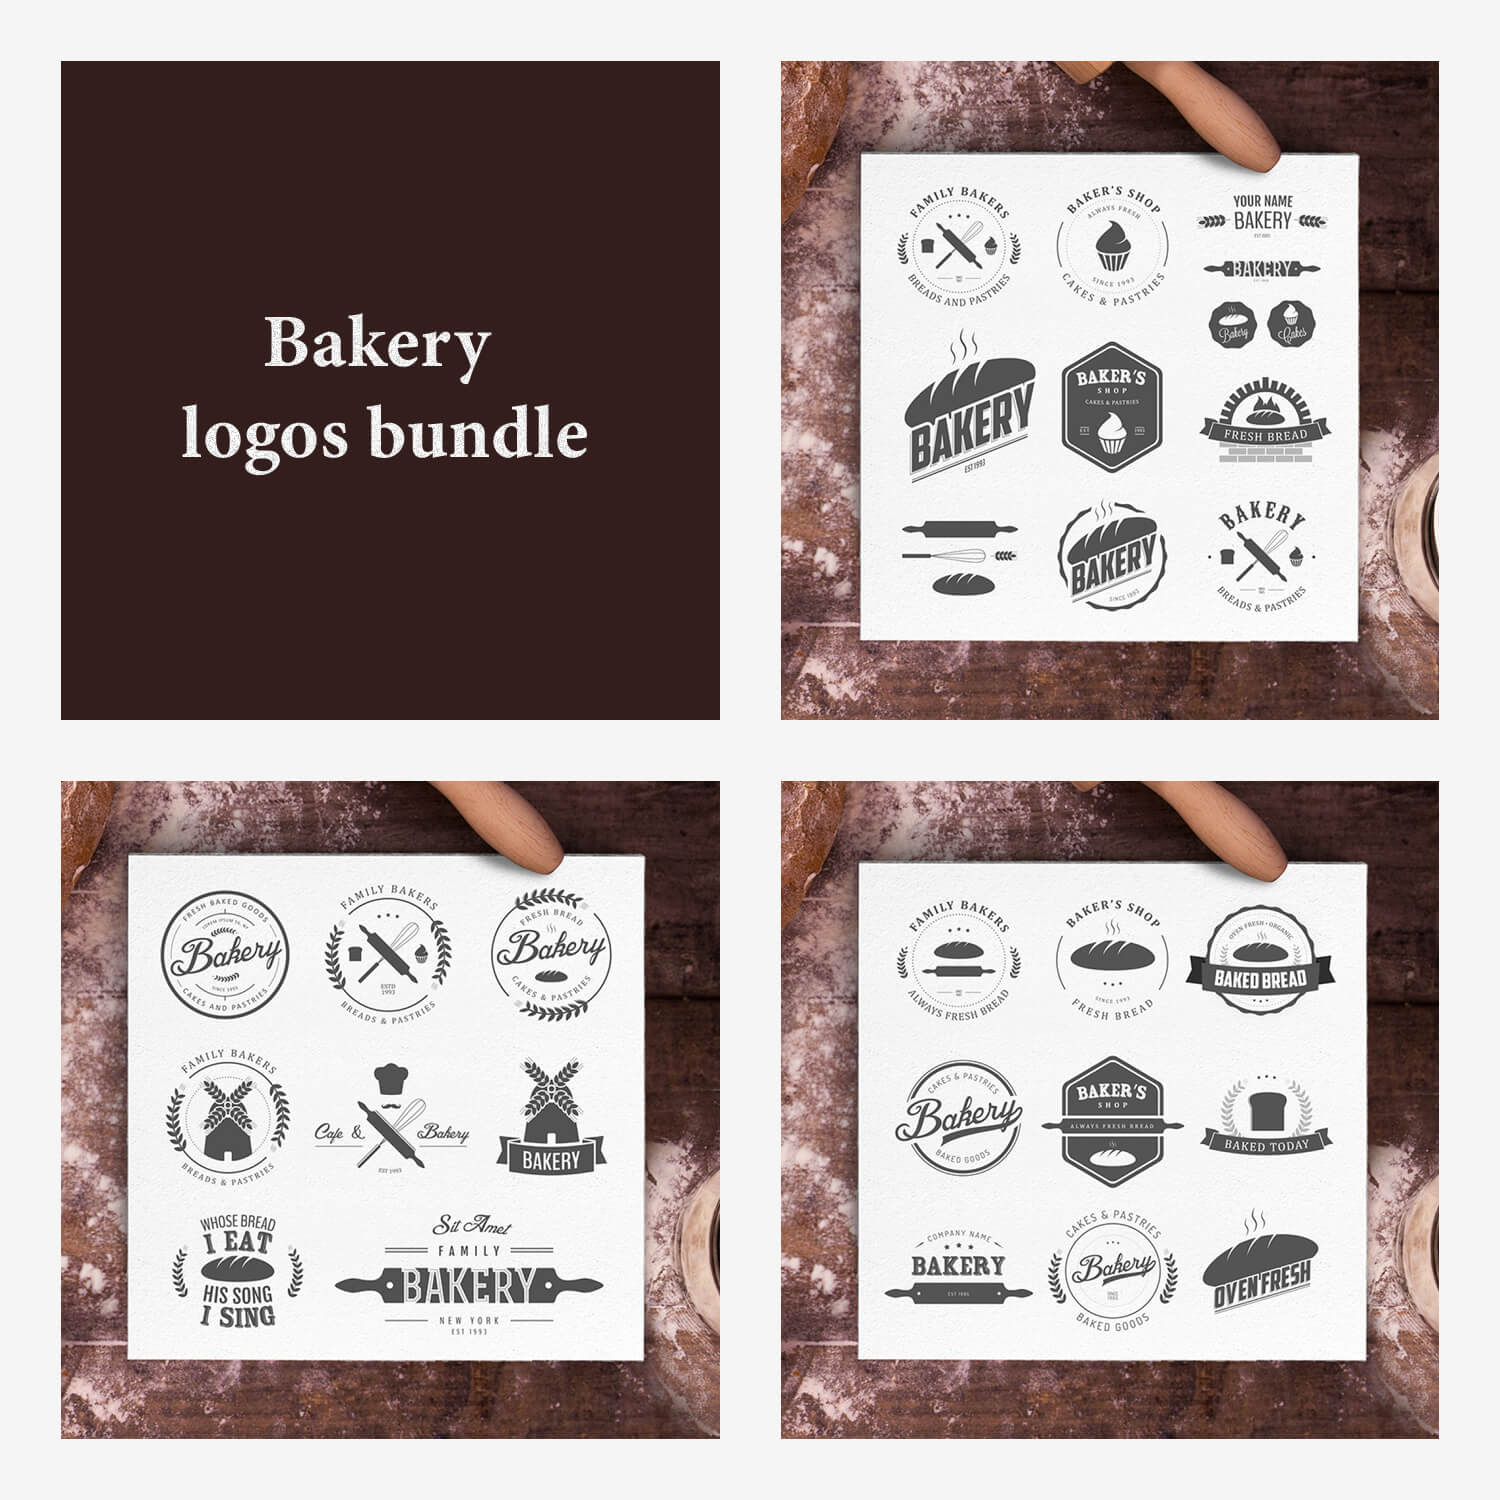 Four pictures of bakery logos bundle in brown.